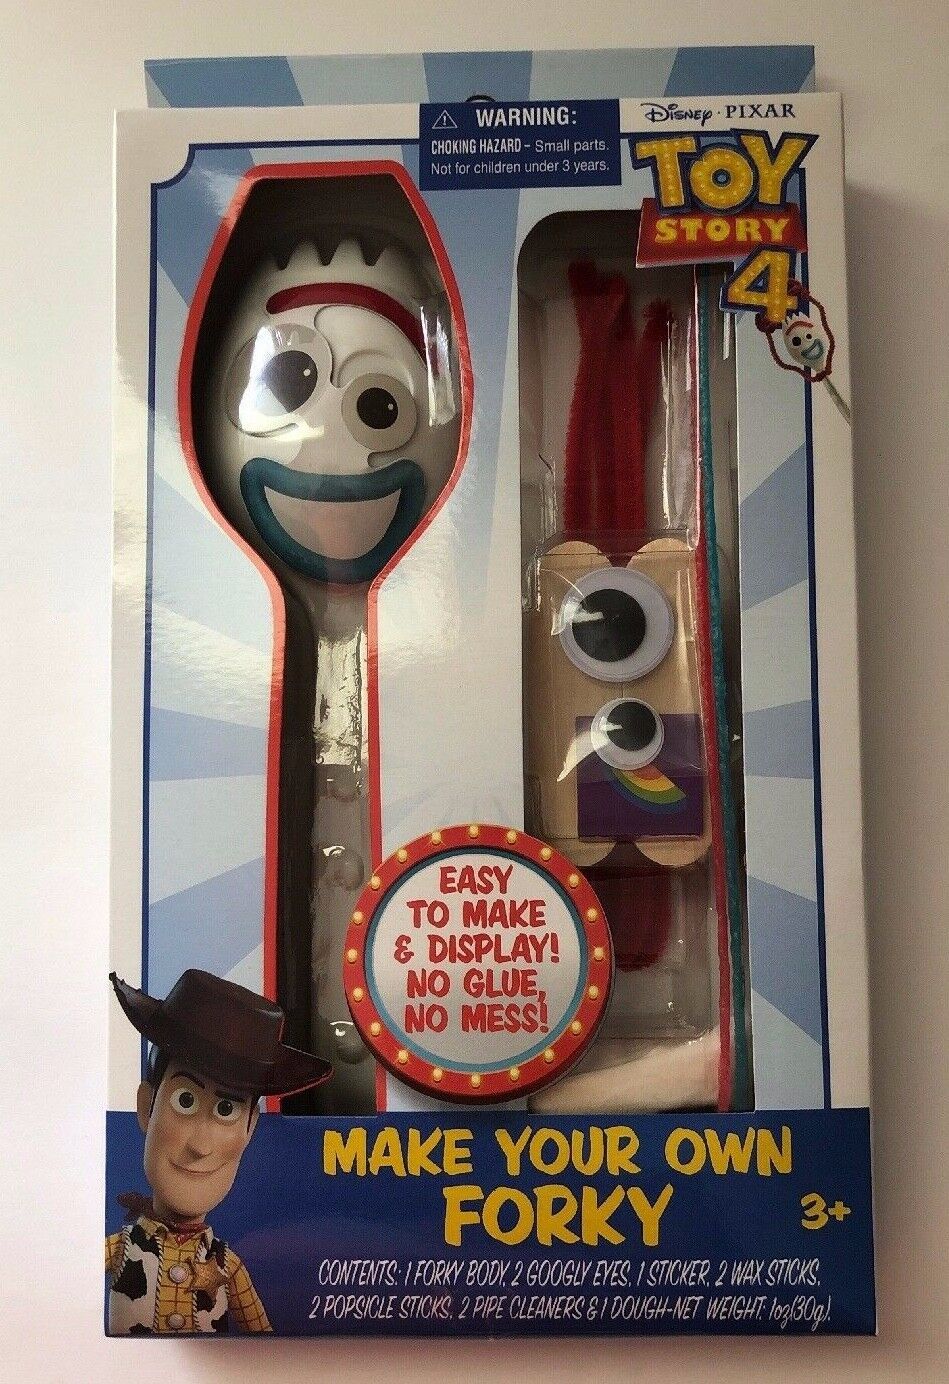 Make Your Own Forky Toy Story 4 Disney Pixar Forky New - $12.66